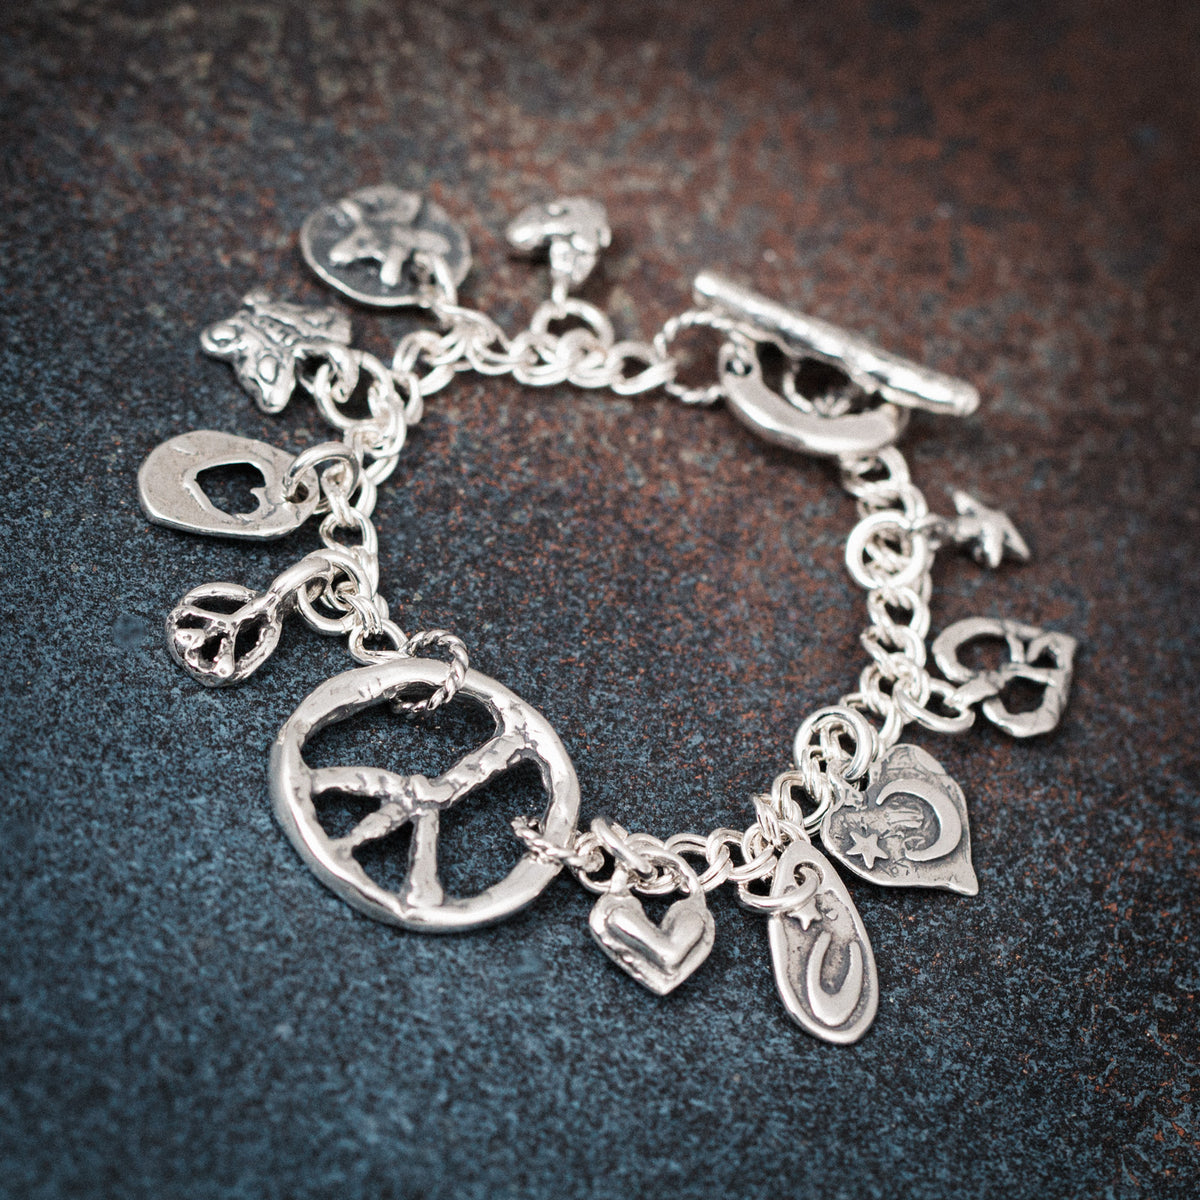 charm bracelet with peace sign hearts and butterfly